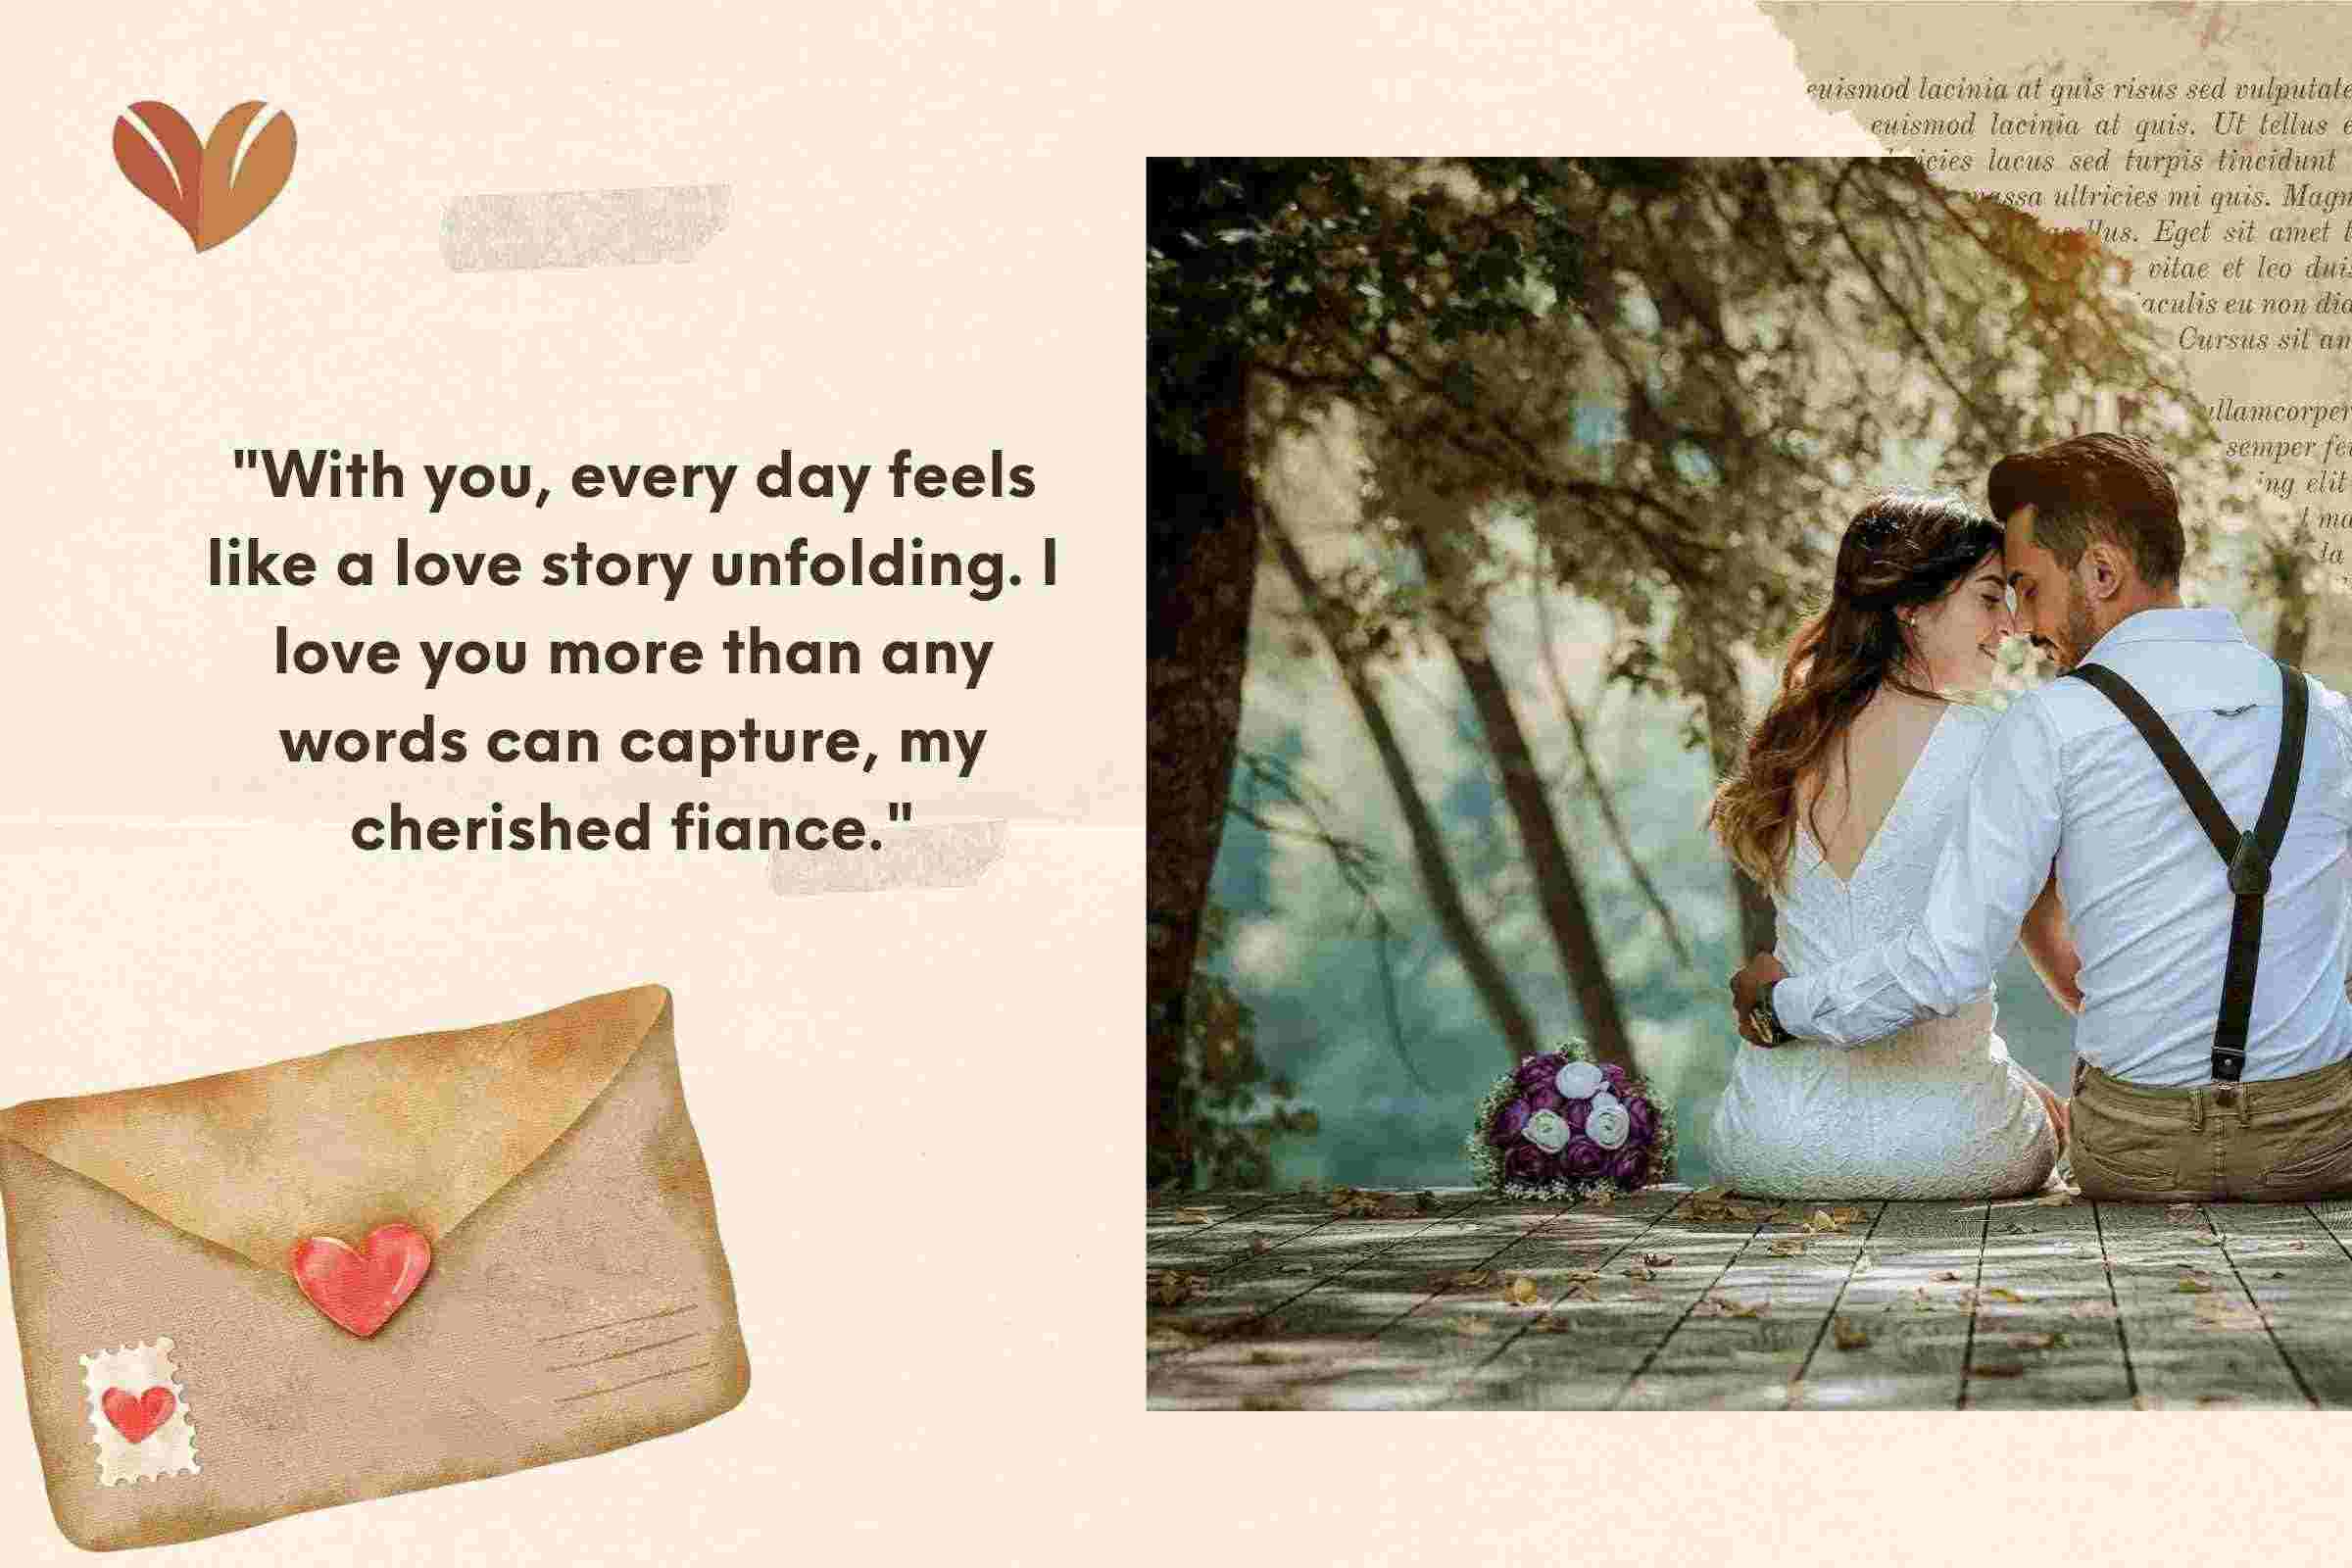 Inscribing love on paper: Fiance card messages that speak volumes. Which one echoes your feelings?